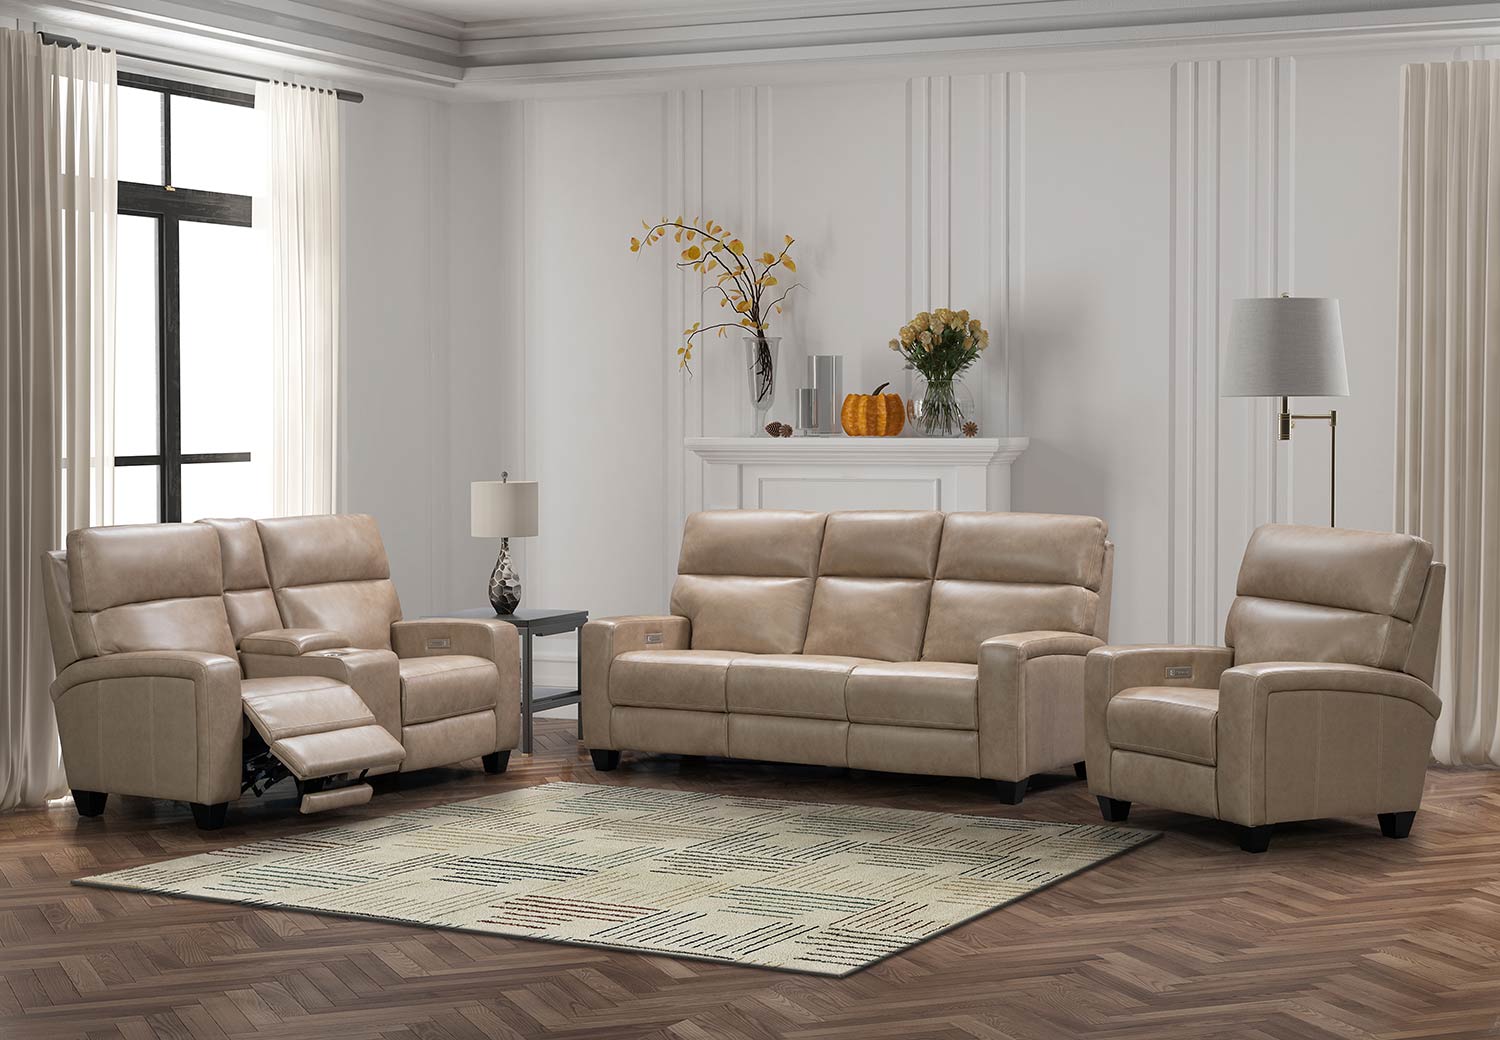 Barcalounger Marcello Power Reclining Sofa Set with Power Head Rests and Power Lumbar - Elliot Taupe/Leather Match